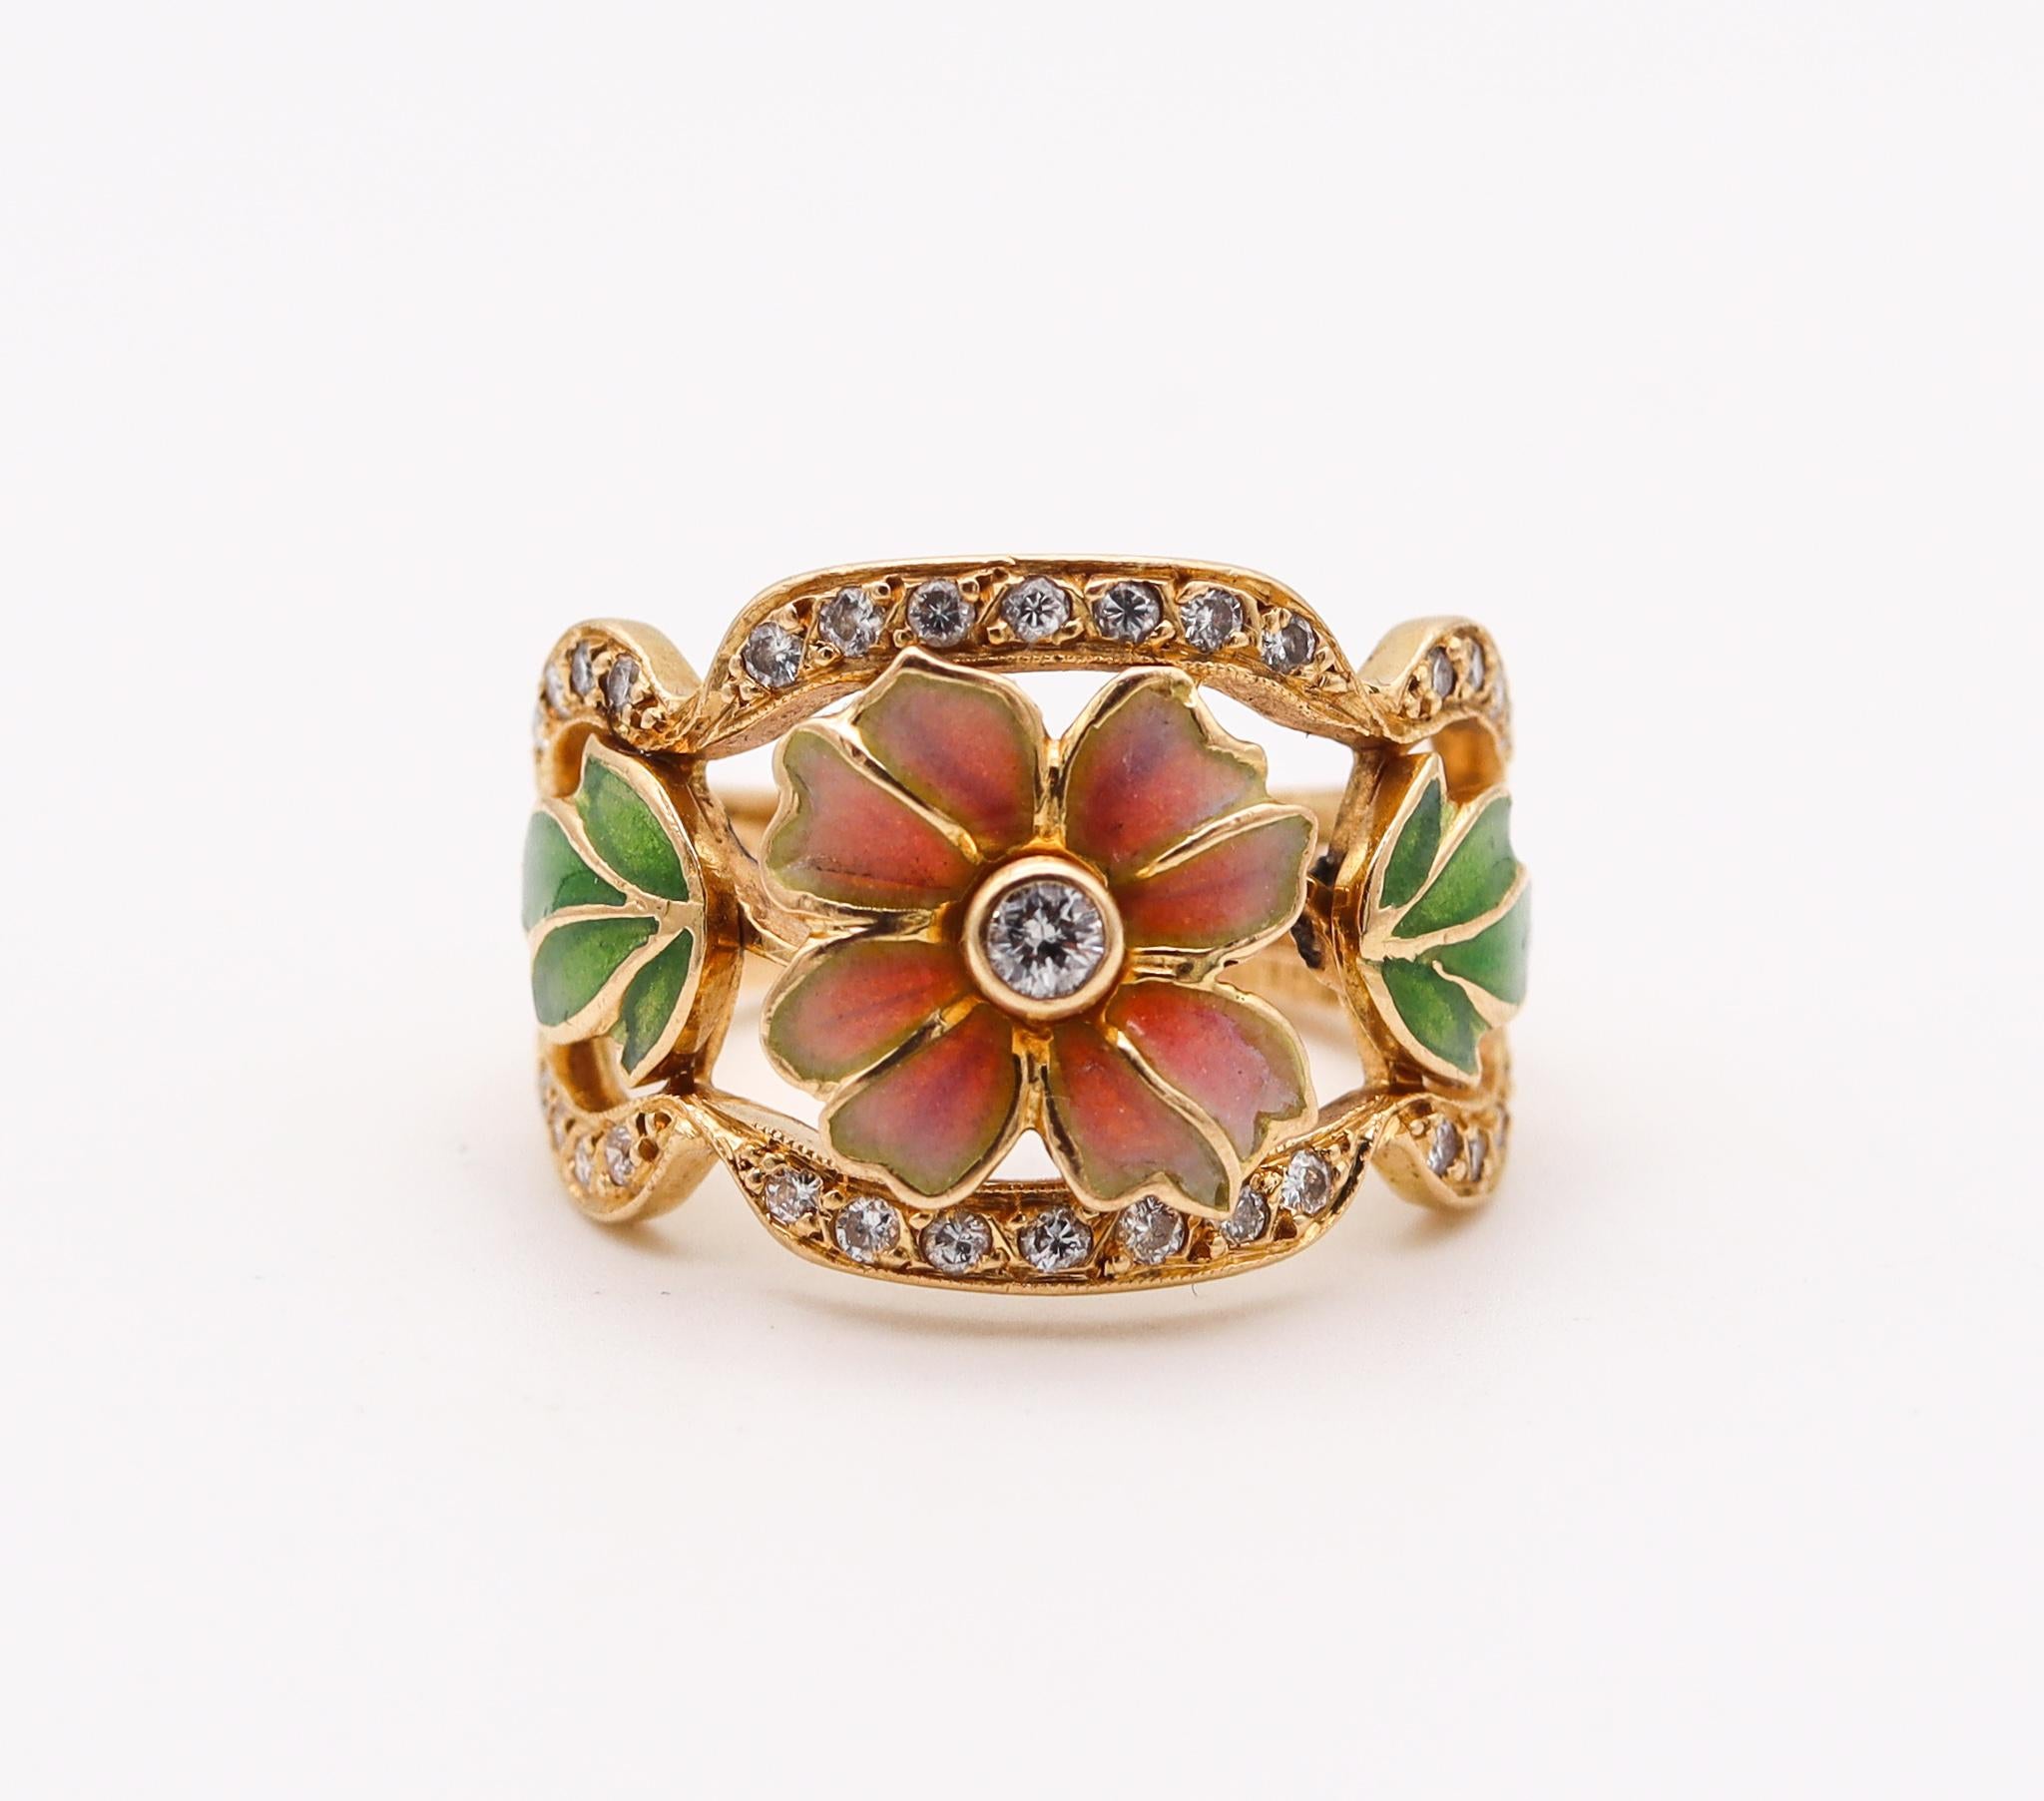 An art nouveau enameled ring designed by Masriera.

Colorful piece, created in Barcelona Spain by the jewelry designer Gloria Masriera for Masriera. This beautiful ring has been crafted with art nouveau revival patterns in solid rich yellow gold of